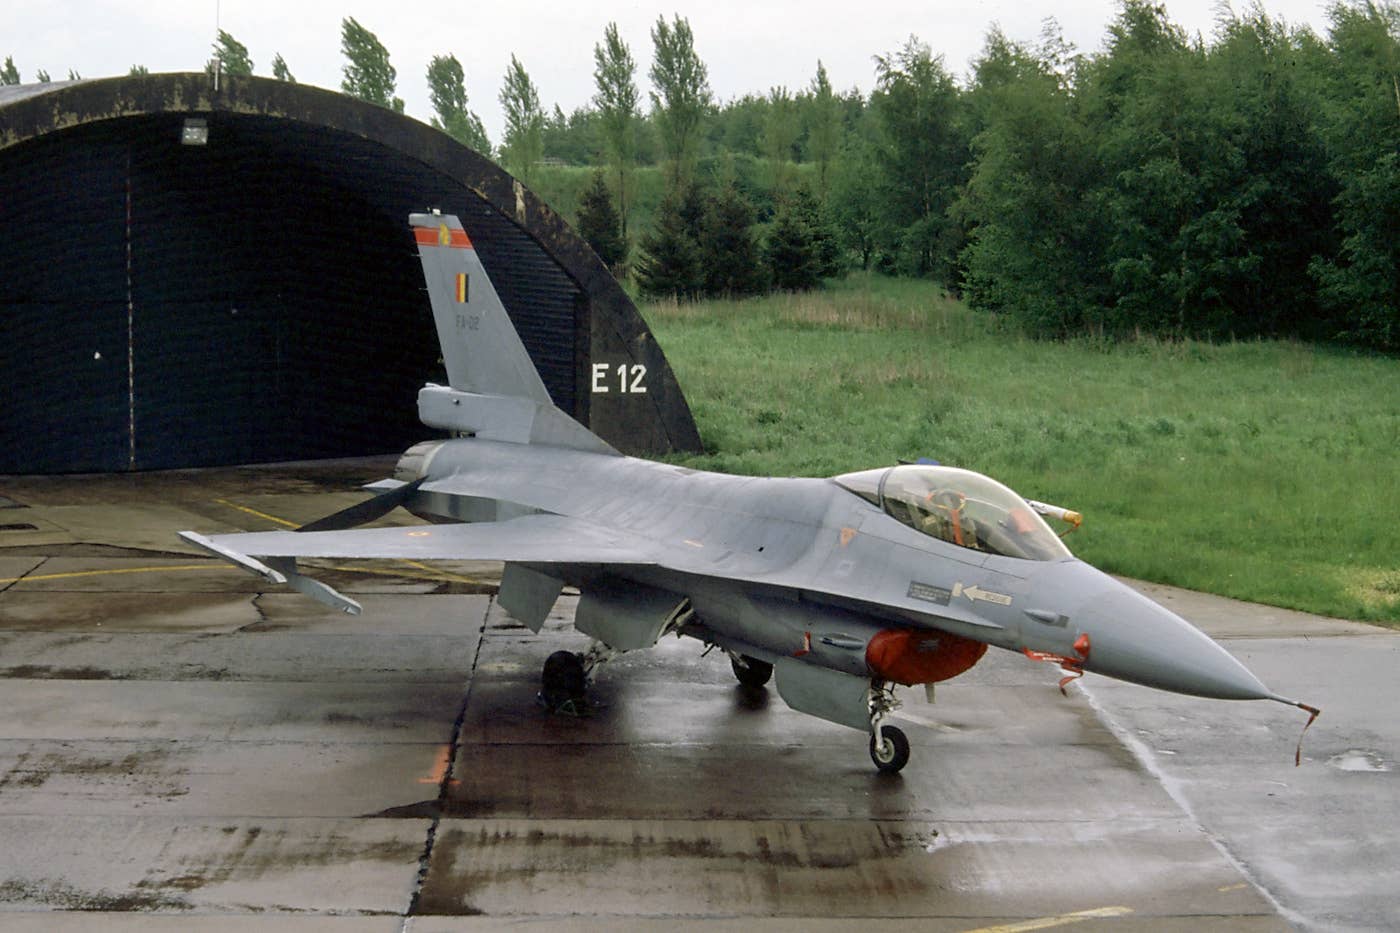 One of the first F-16s built for the Belgian Air Force. The F-16s currently in service will be replaced by F-35s. (Wikimedia Commons photo by Rob Schleiffert)